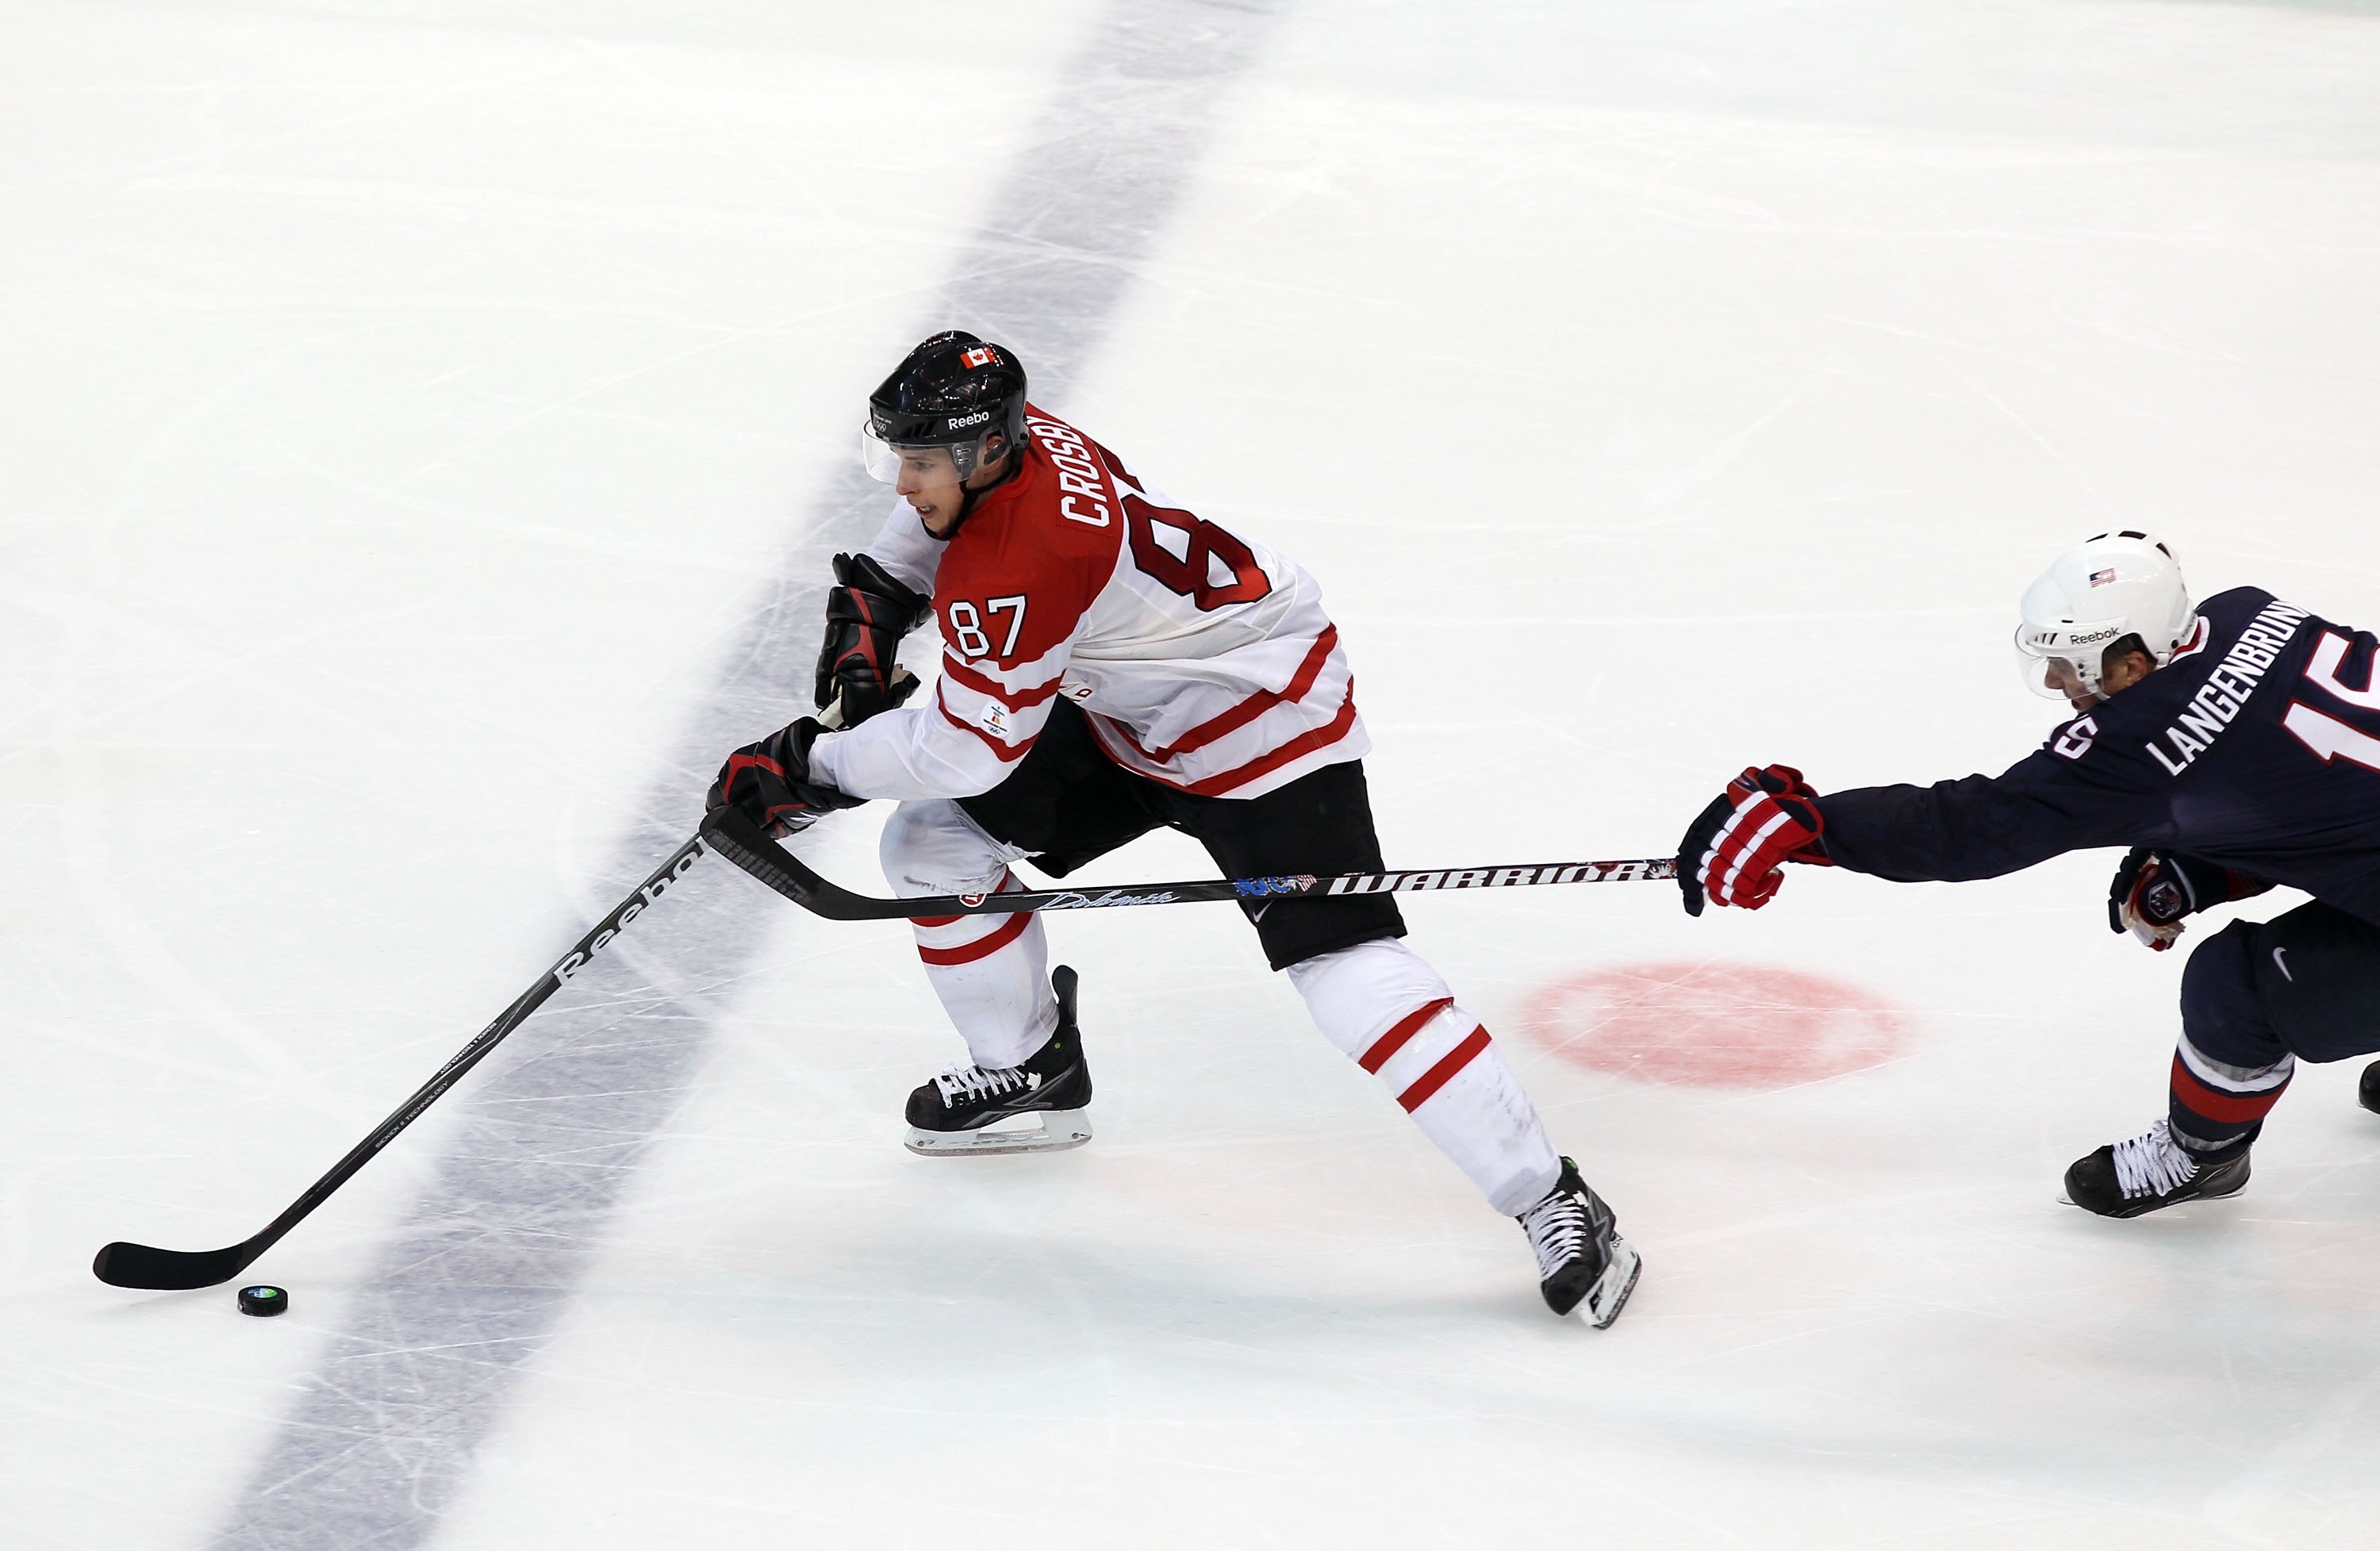 This is a photo of Canadian hockey player Sidney Crosby playing in the 2010 gold medal game.